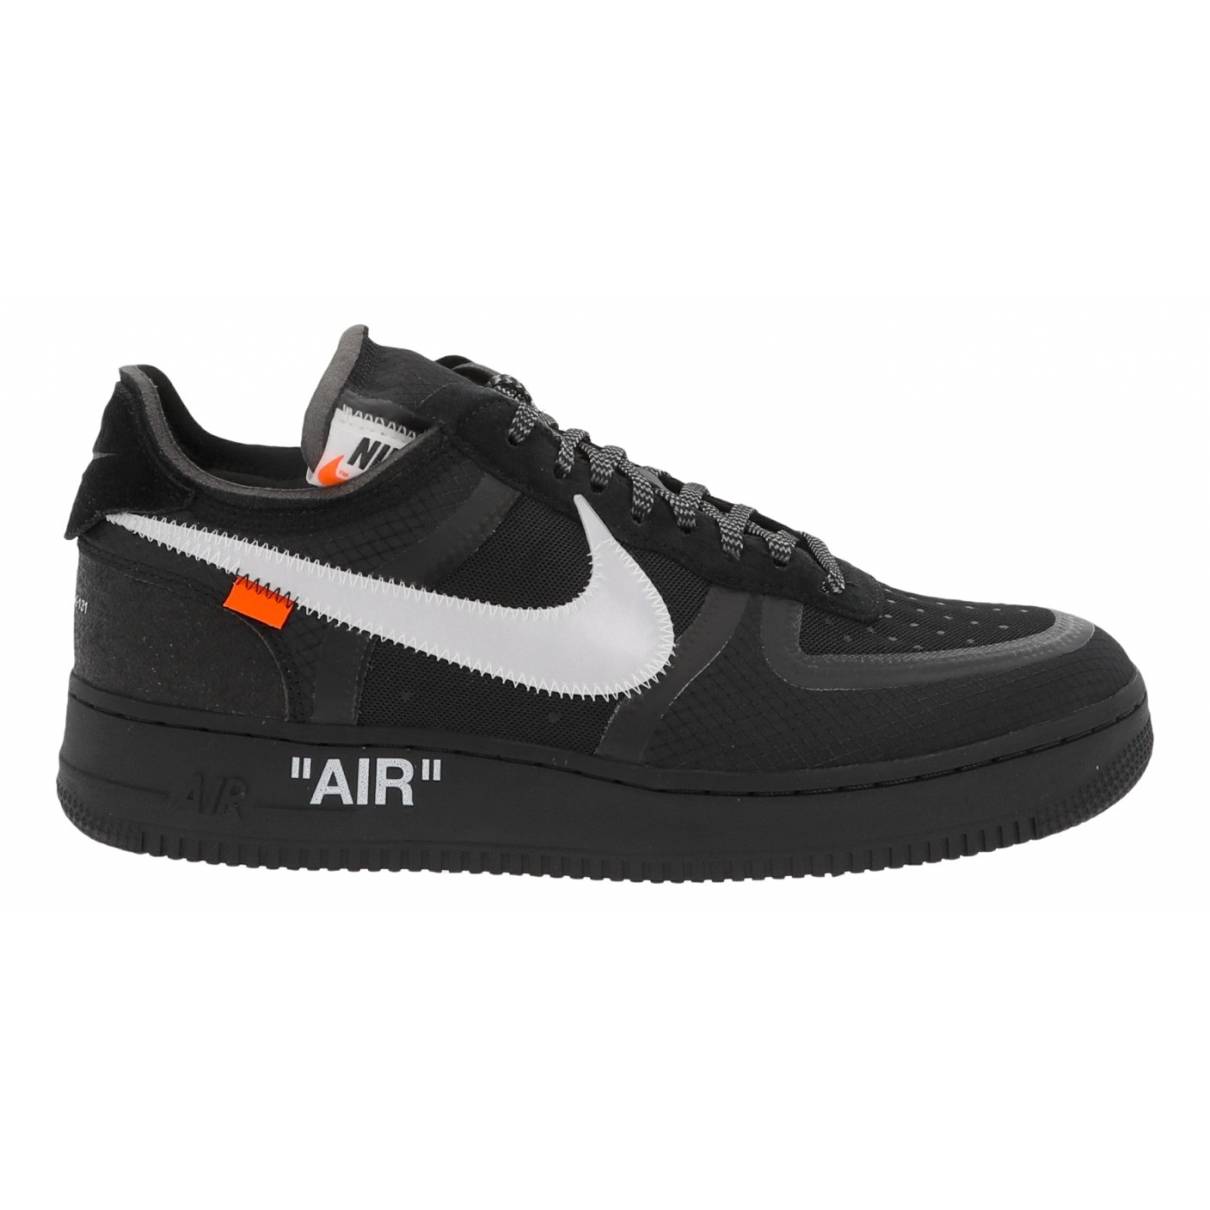 Air force 1 leather low trainers Nike x Off-White Black size 10 US in  Leather - 19595316